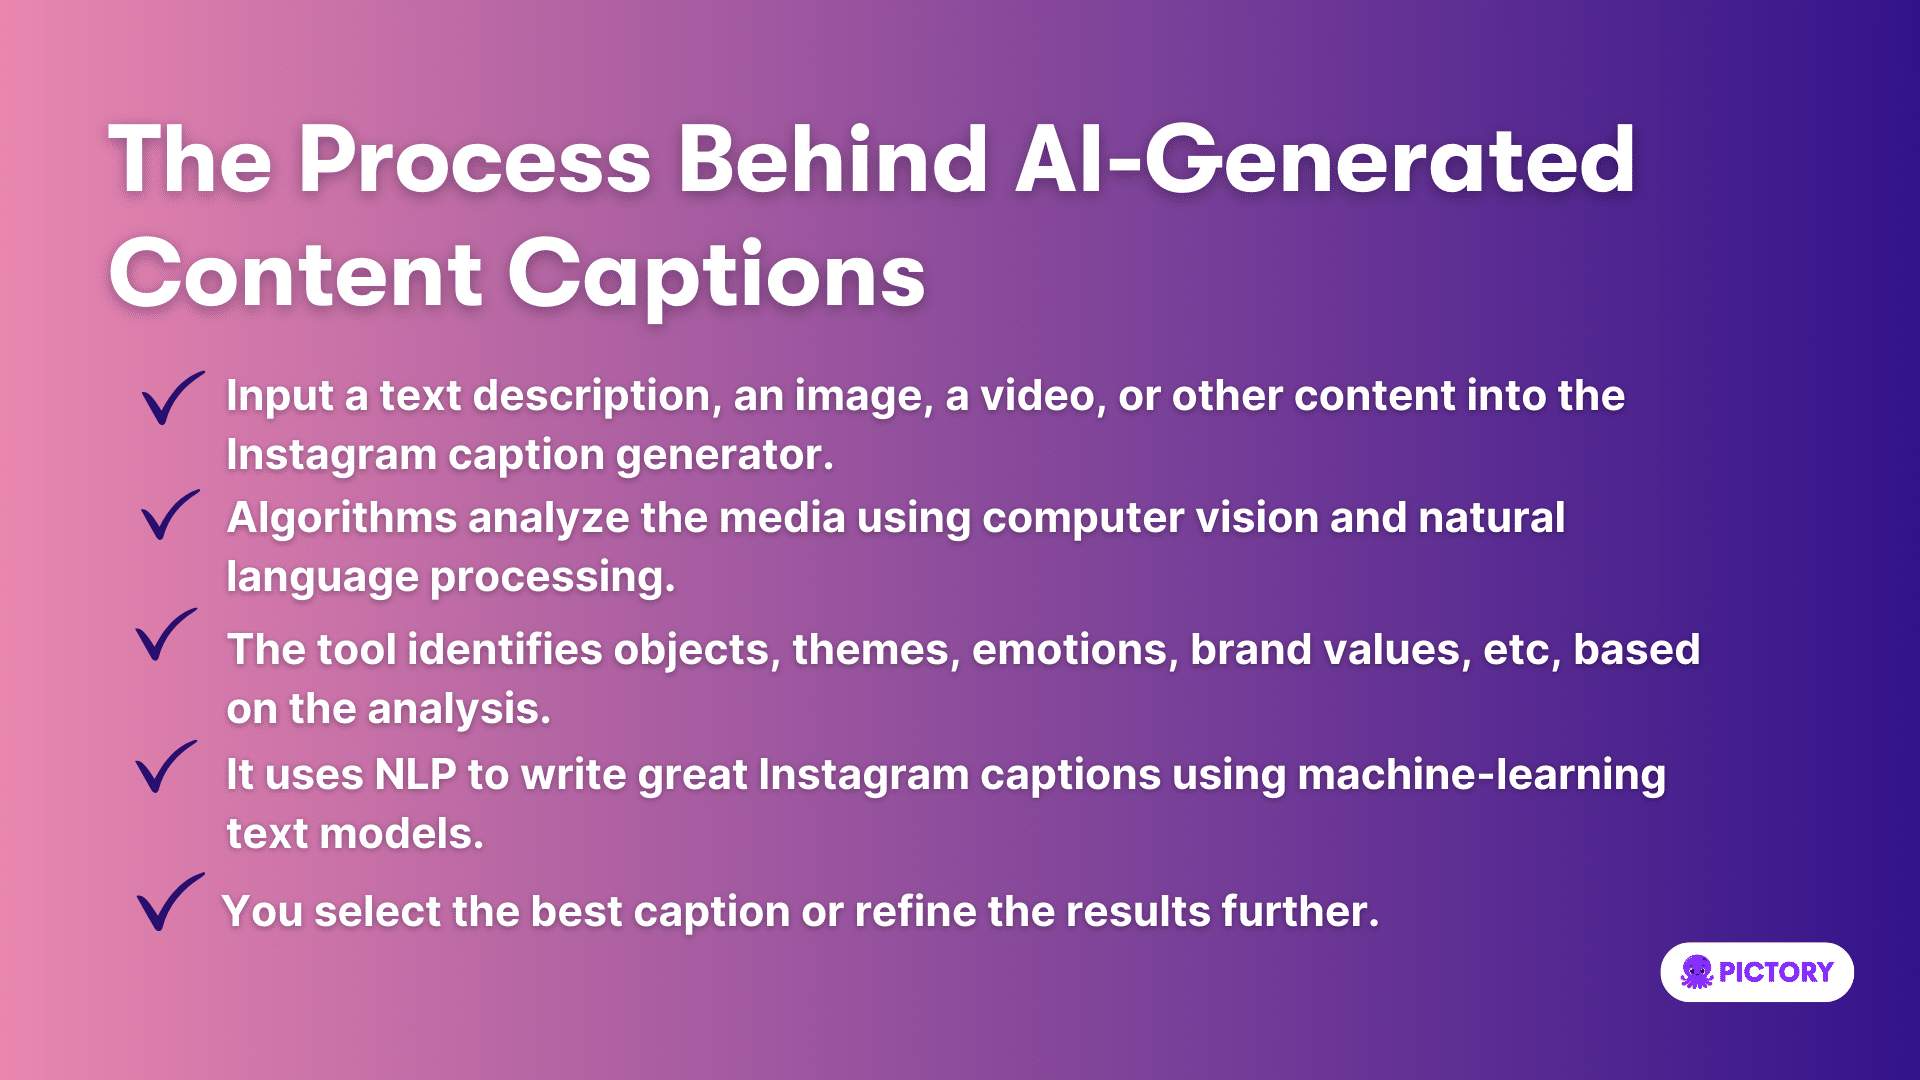 The Process Behind AI-Generated Content Captions